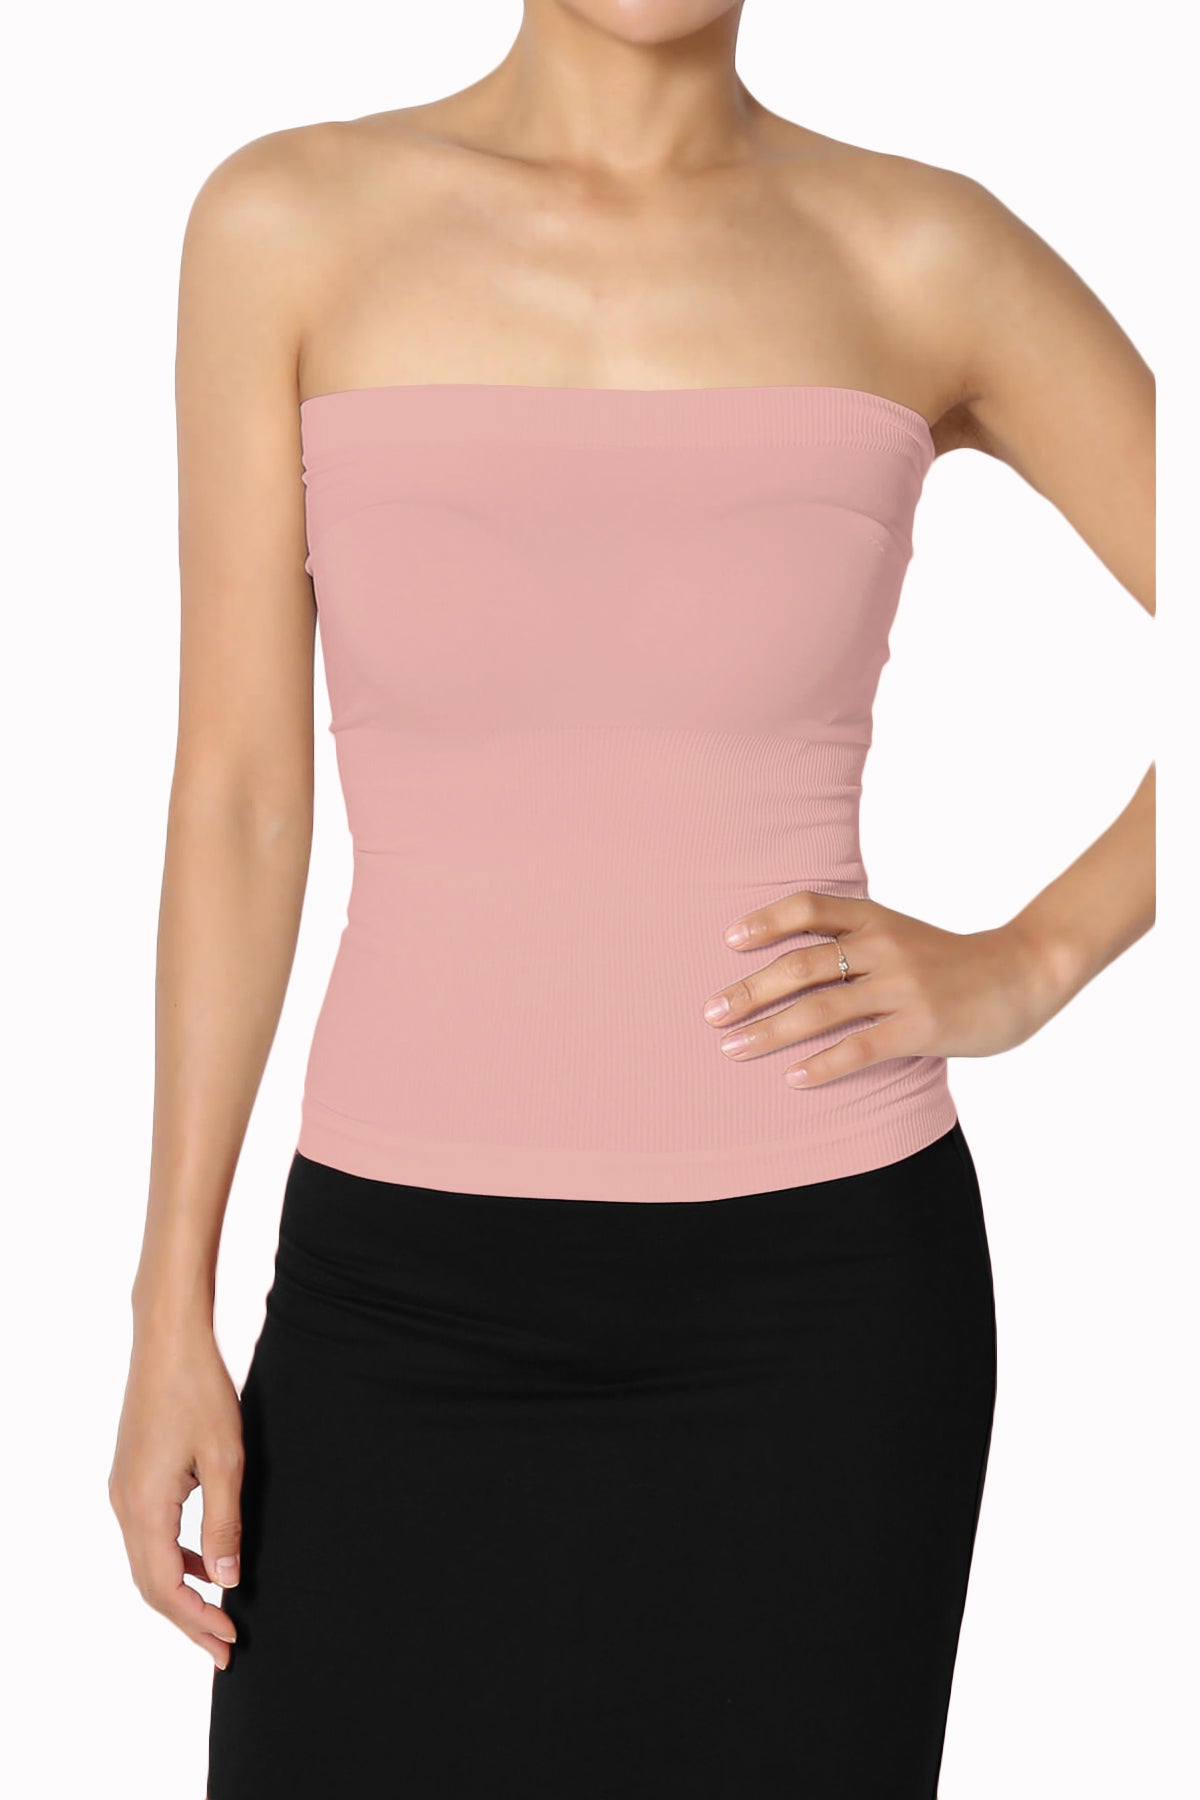 Load image into Gallery viewer, Ellenie Strapless Sealmess Tube Top DUSTY ROSE_1
